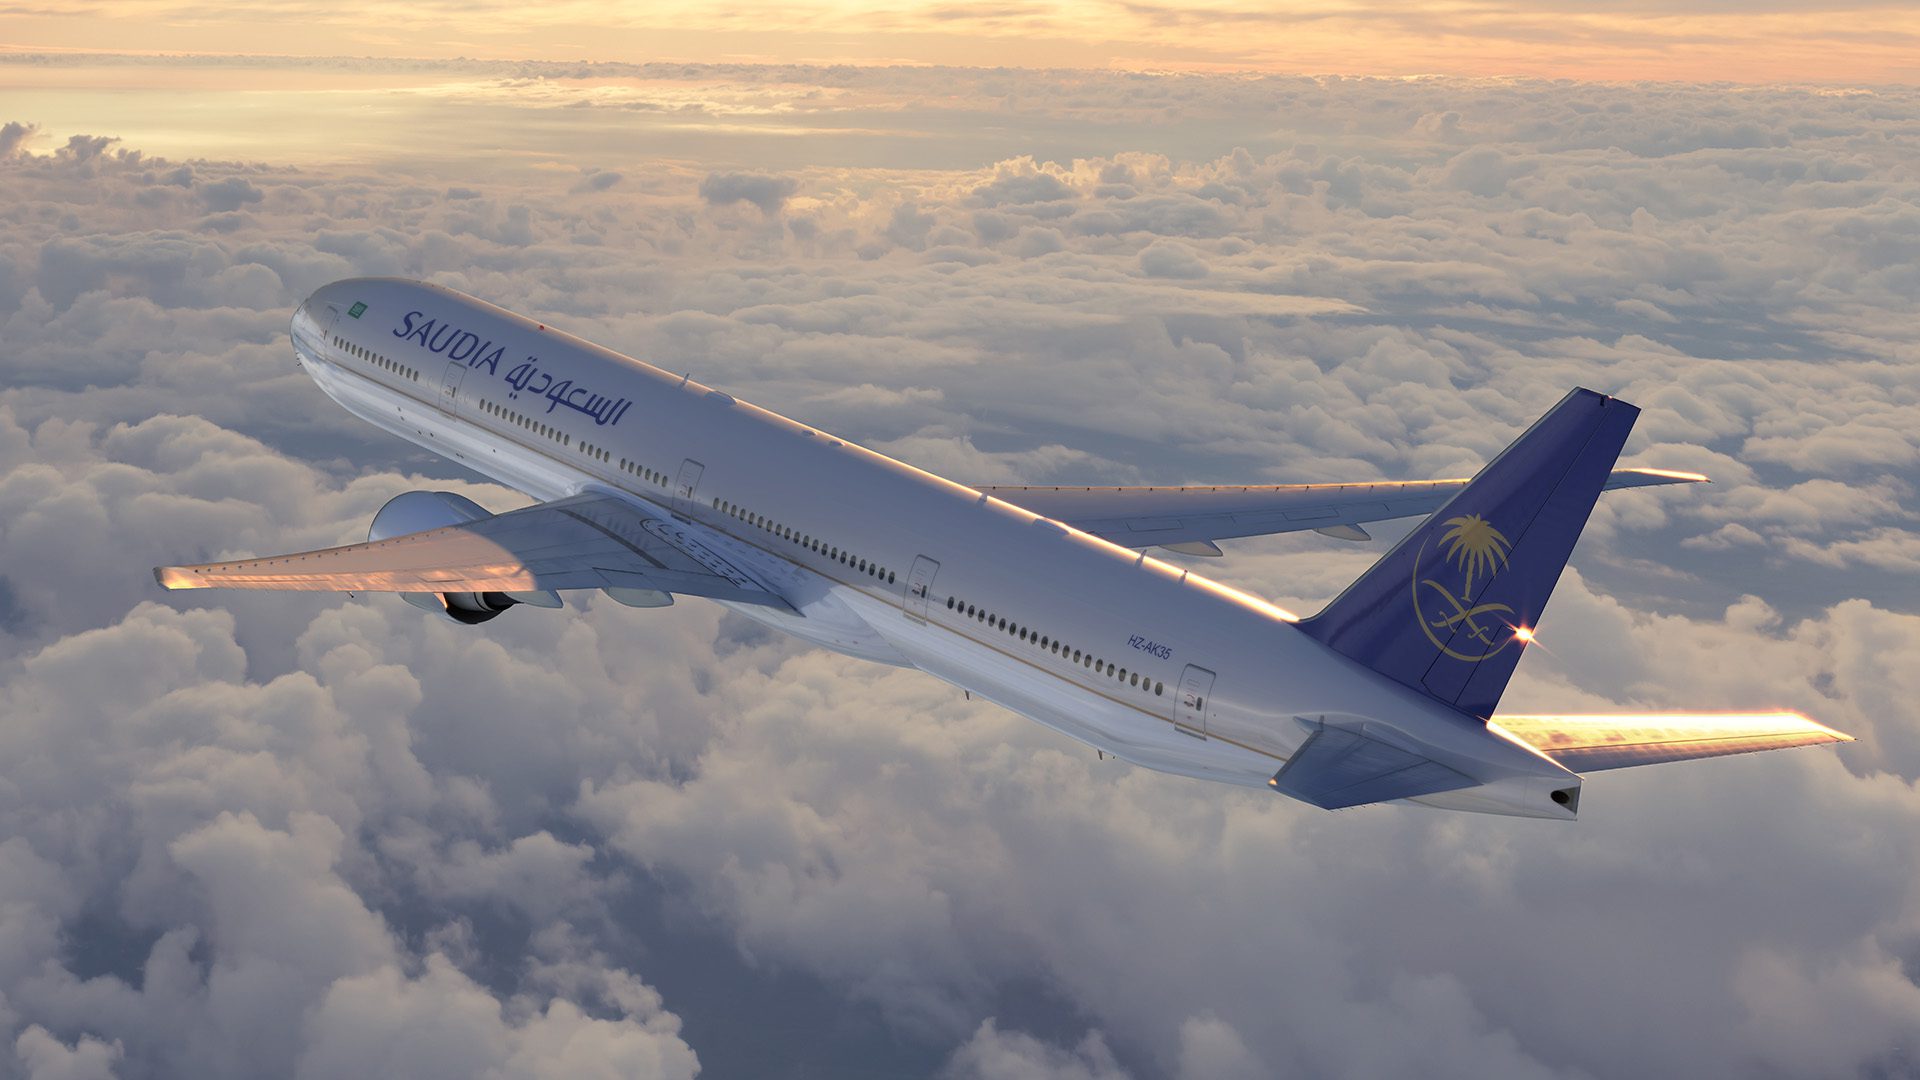 Saudi Airlines Flight Tickets With A Free 96-Hour Visa